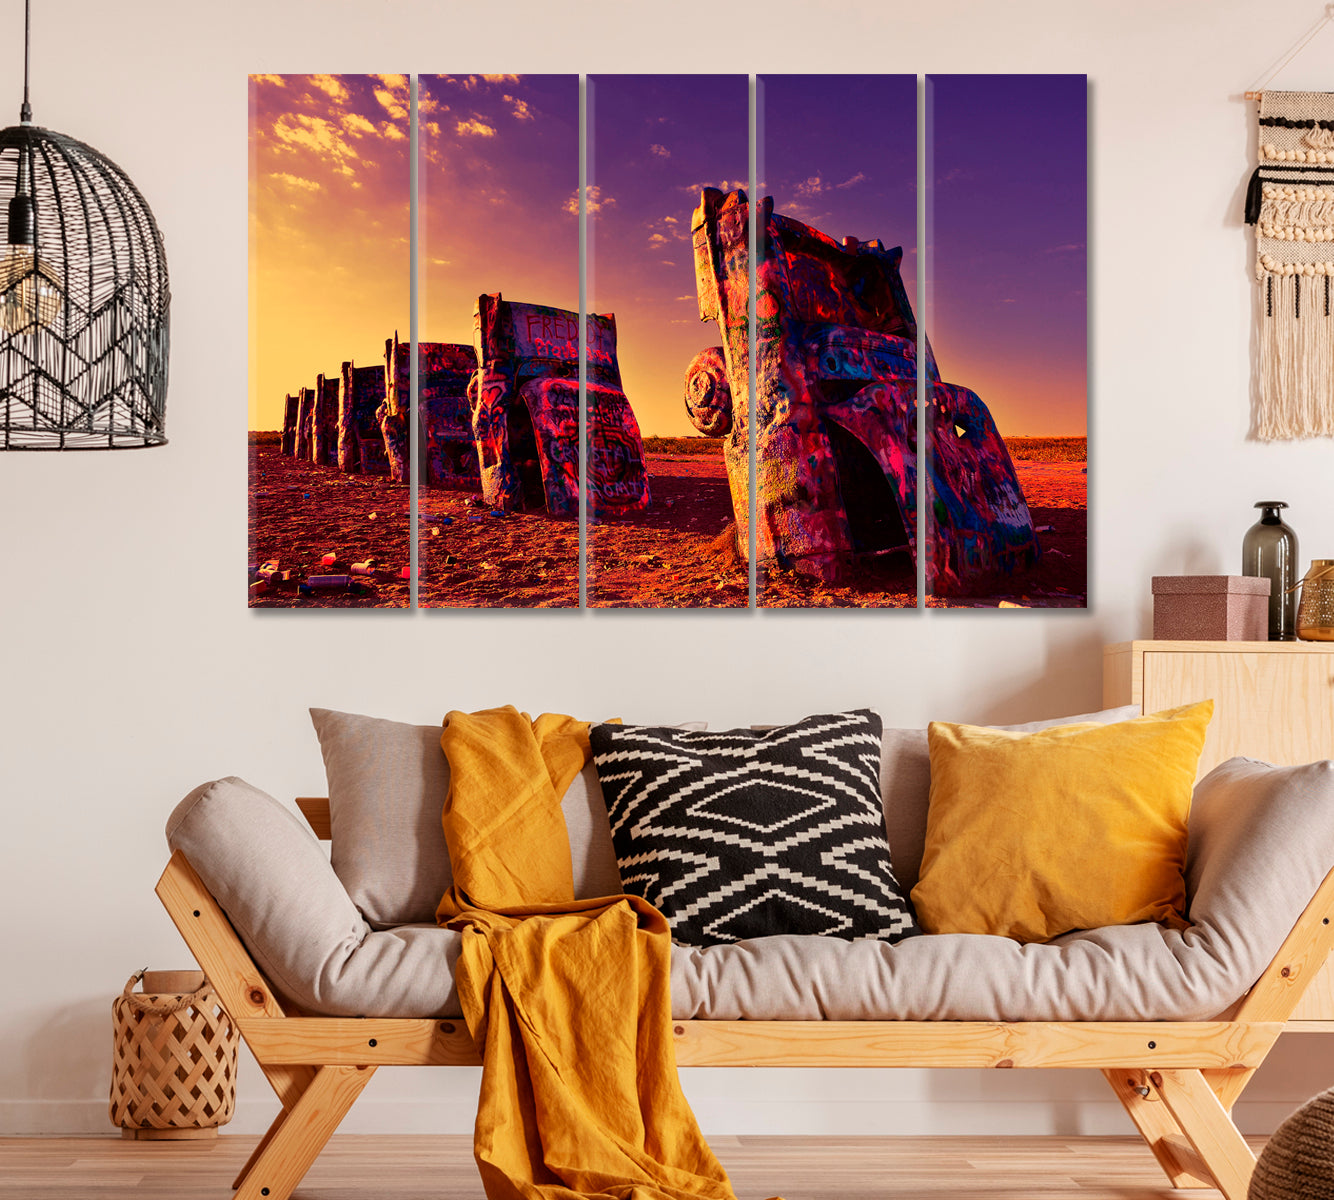 Cadillac Ranch in Amarillo on Route 66 Texas Canvas Print ArtLexy 5 Panels 36"x24" inches 